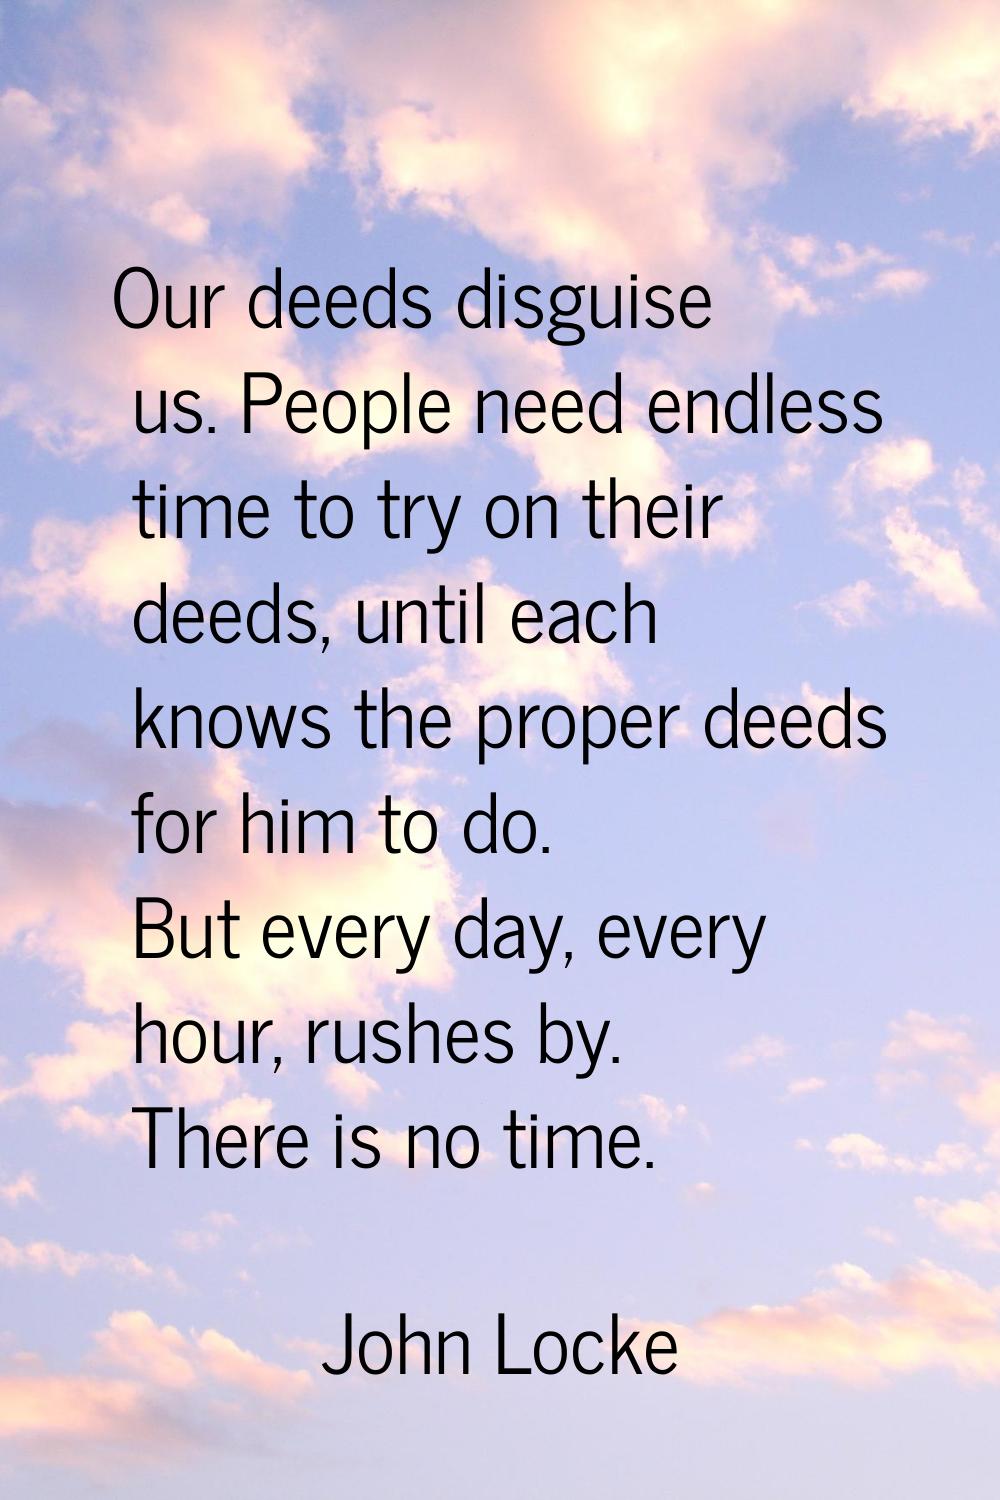 Our deeds disguise us. People need endless time to try on their deeds, until each knows the proper 